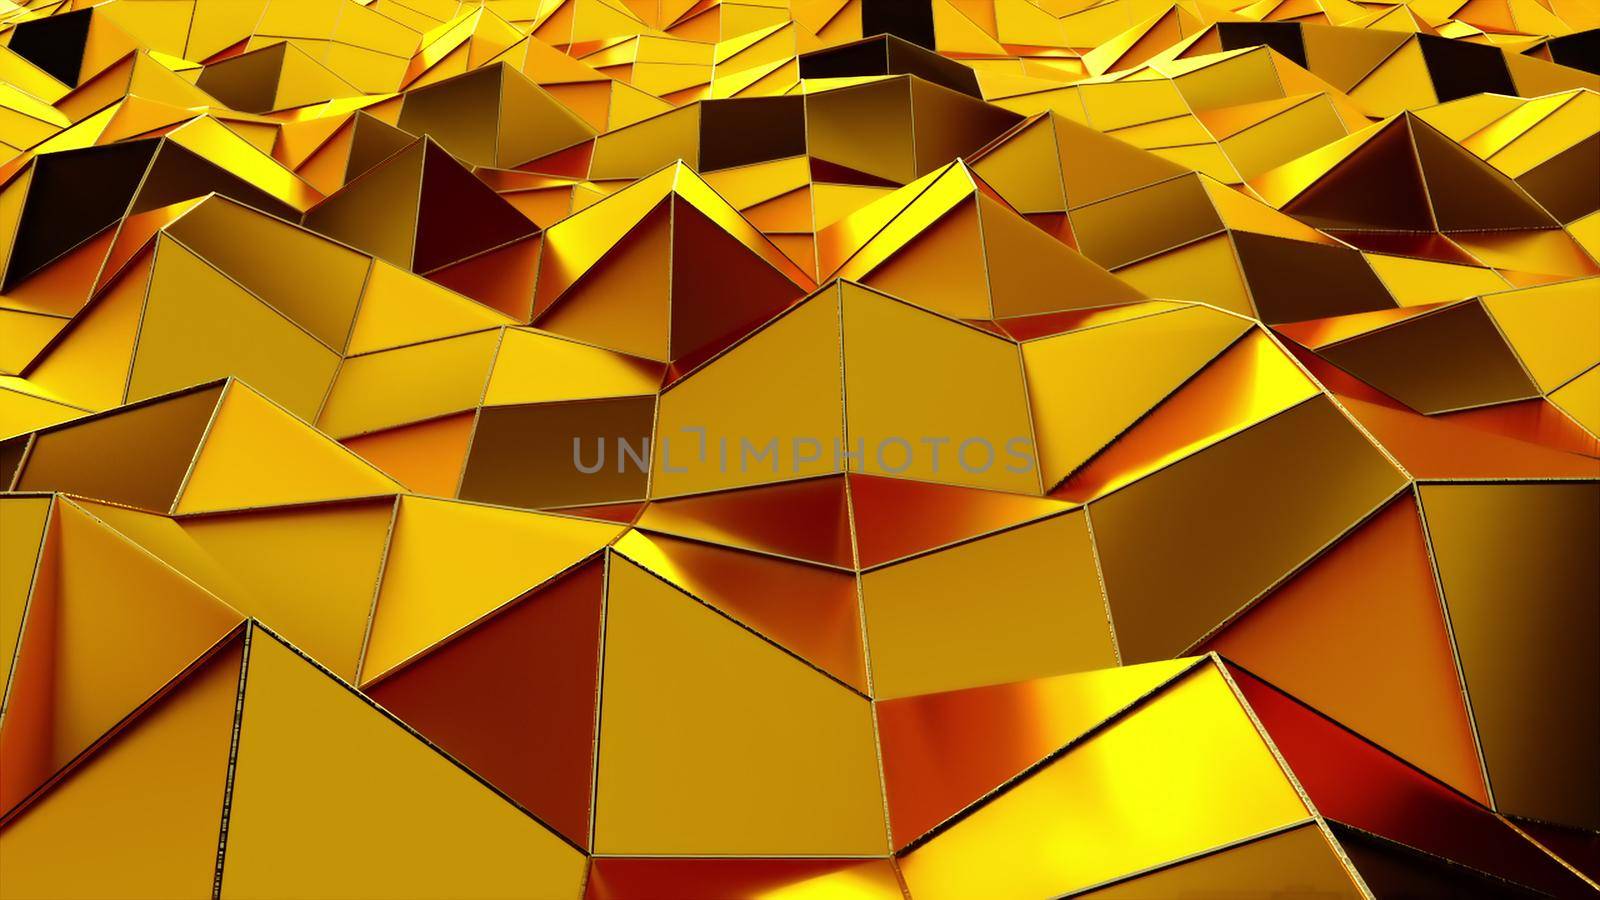 Geometric 3d render crystals from shiny triangular shapes. Digital mountains shape shifting bright highlights. Futuristic wave textures with creative curves and bulges